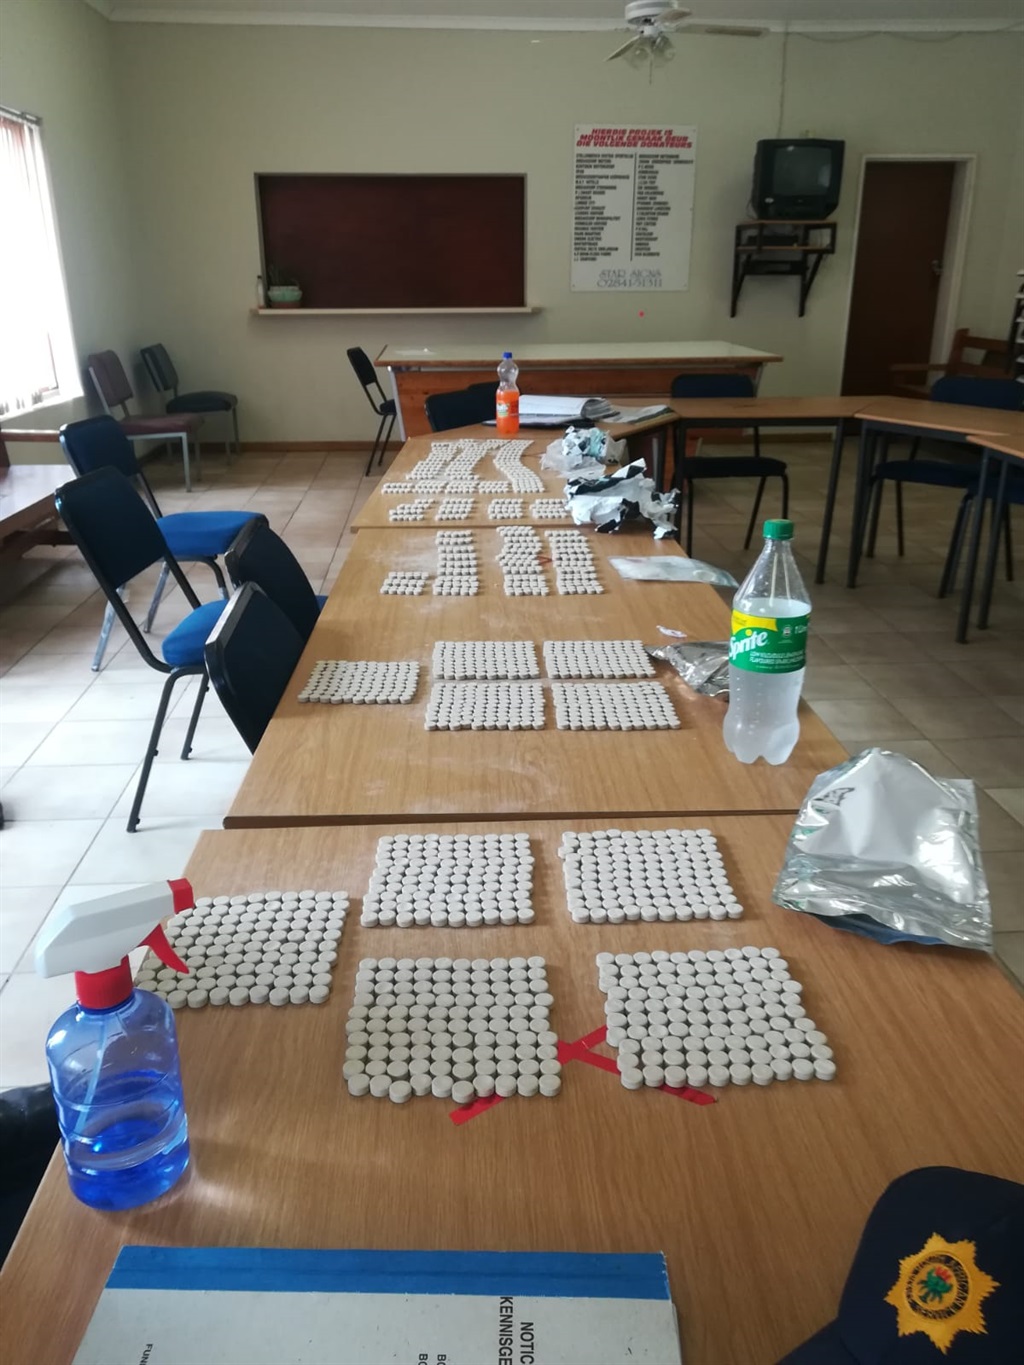 Mandrax tablets, tik and cash found by police